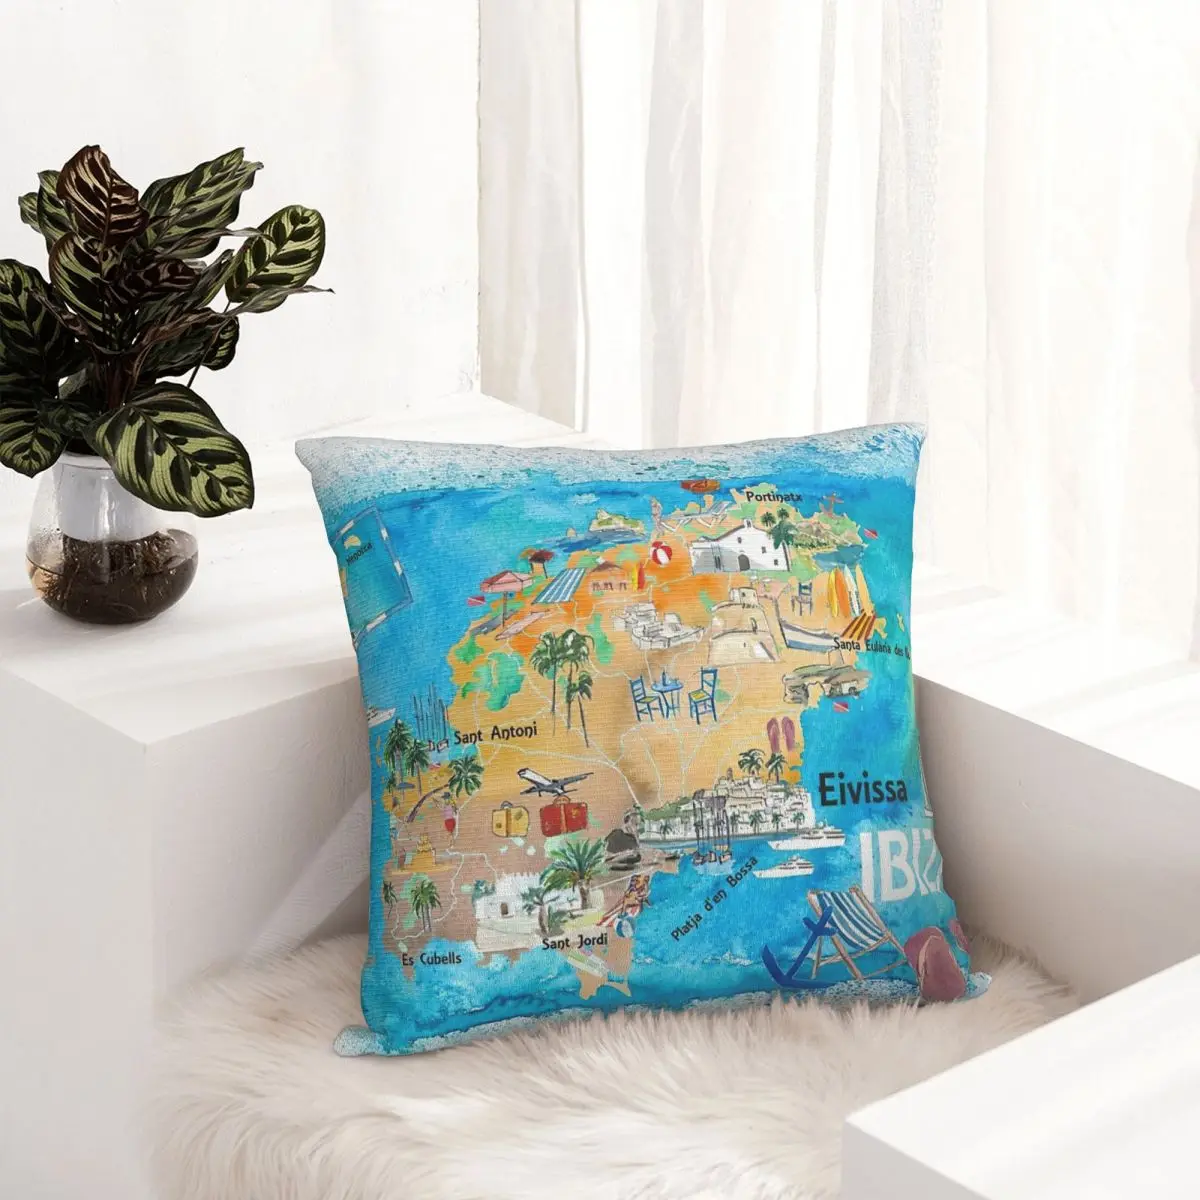 

Ibiza Spain Illustrated Map With Landmarks And Highlights pillowcase printed cushion cover sofa waist pillow pillow cover